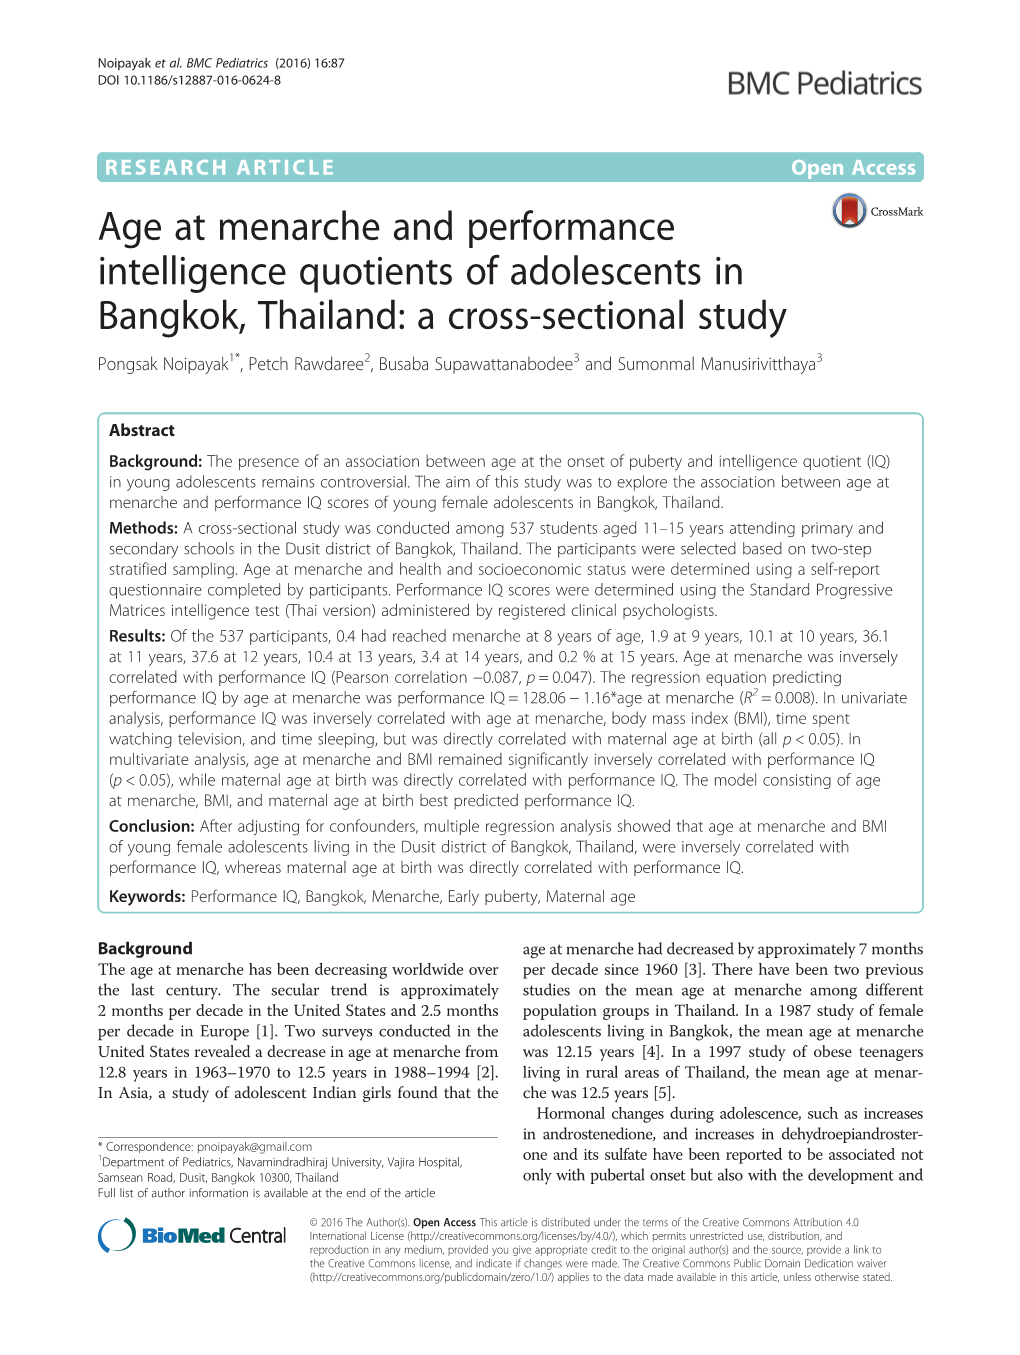 Age at Menarche and Performance Intelligence Quotients Of